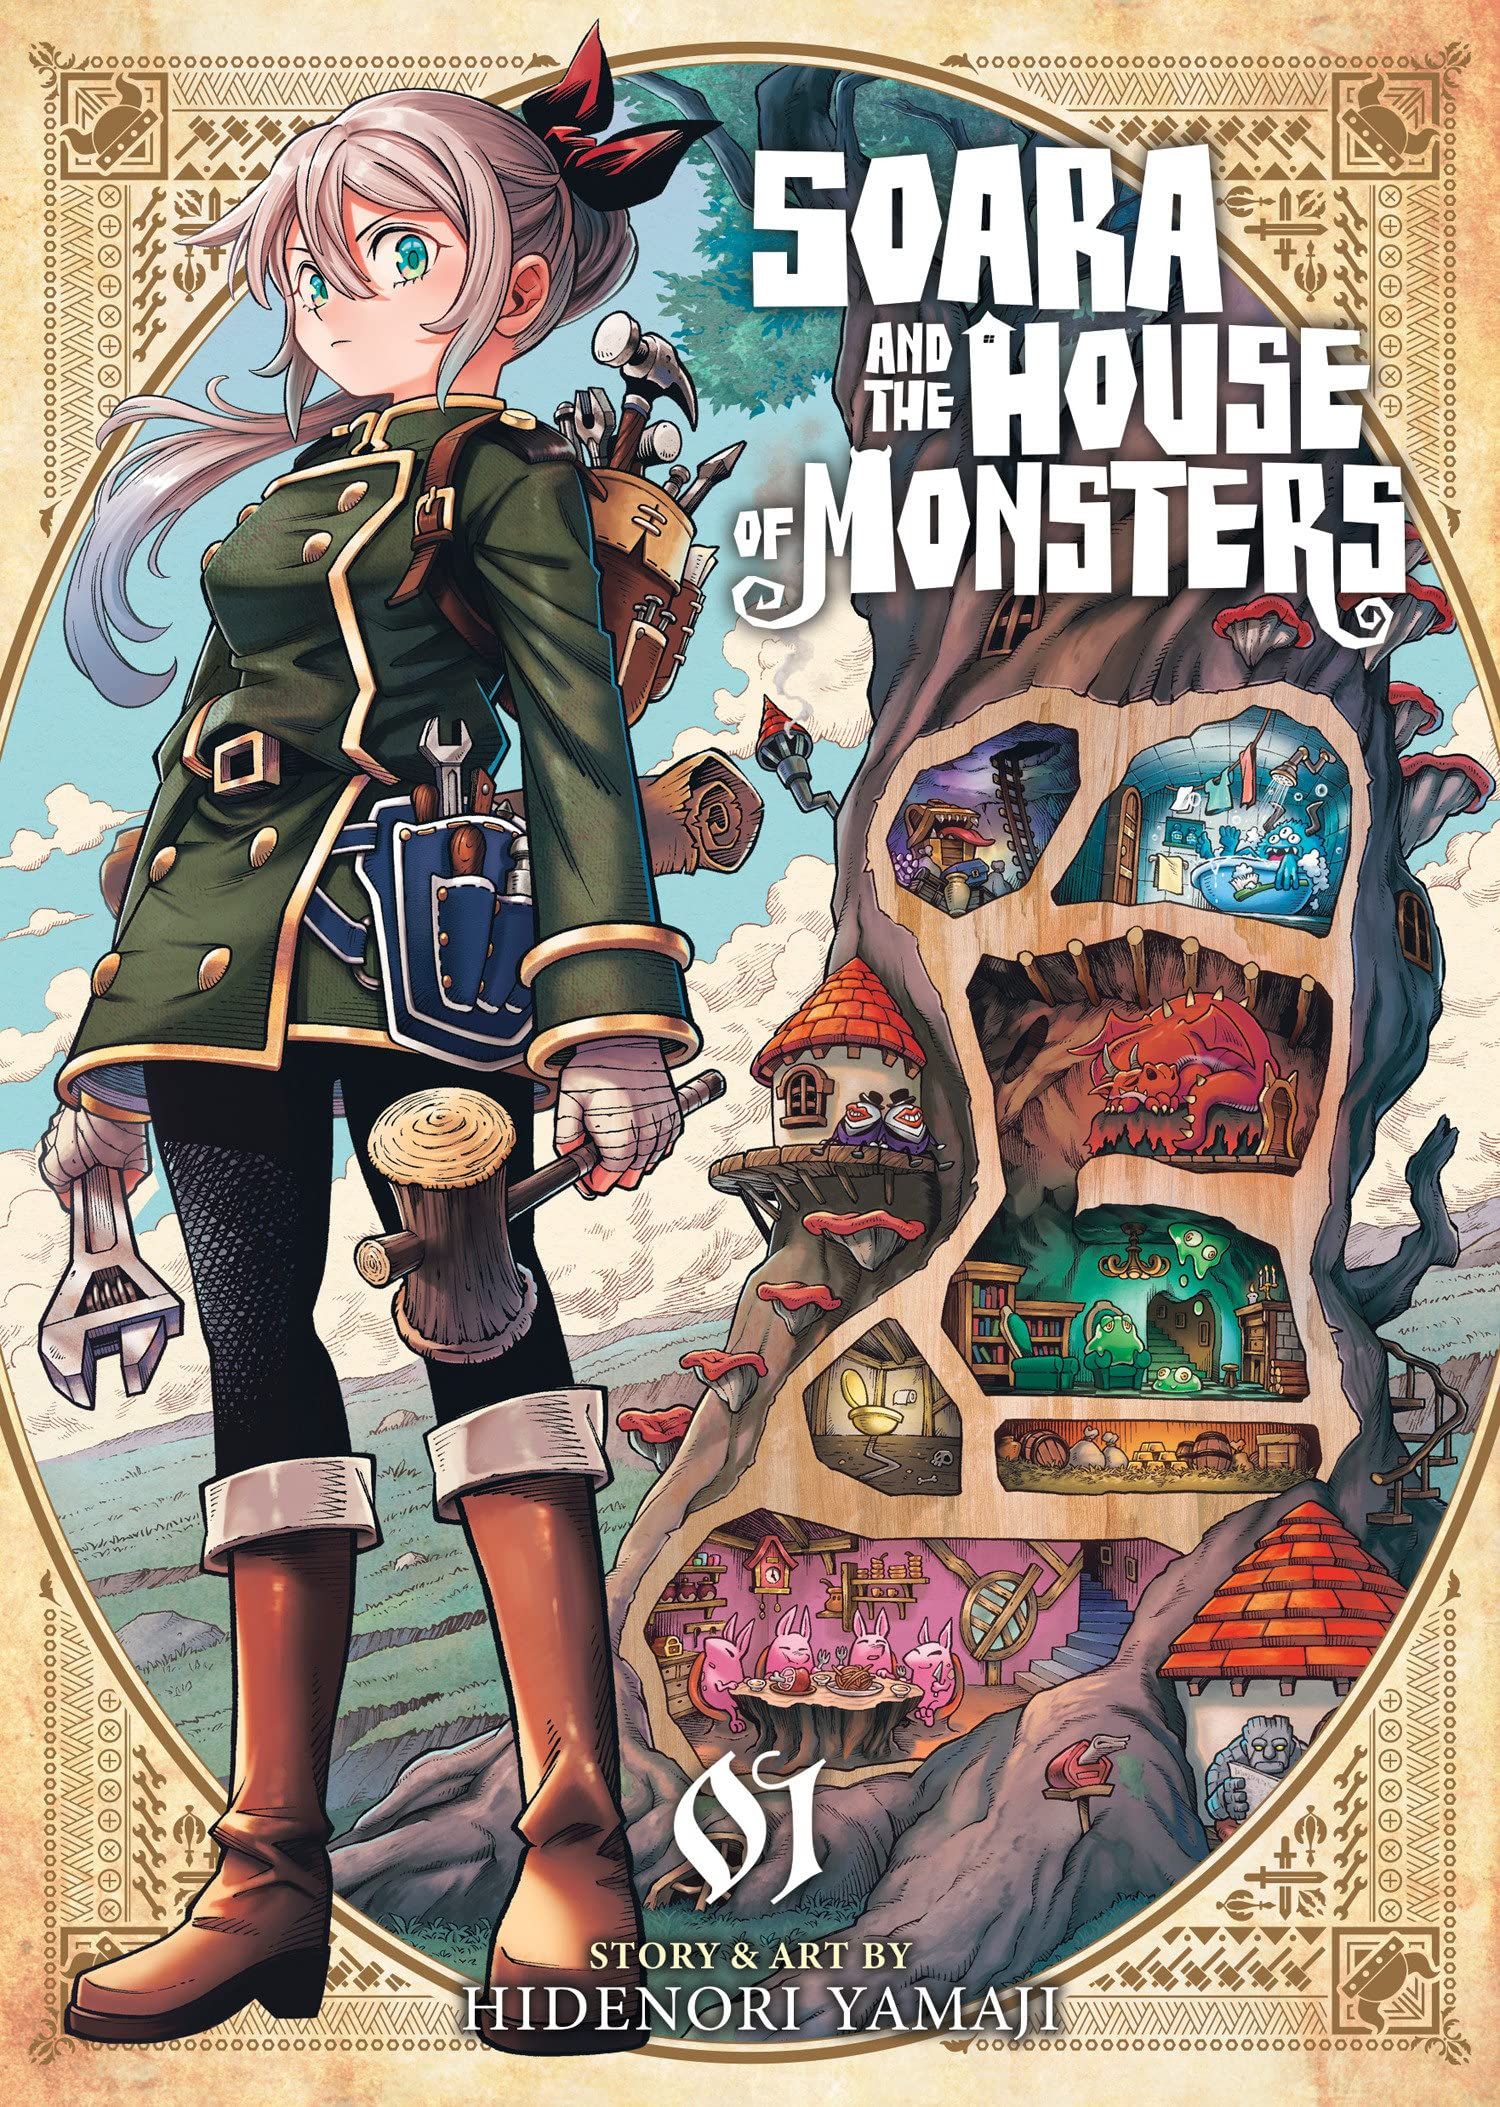 Soara and the House of Monsters by Hidenori Yamaji cover